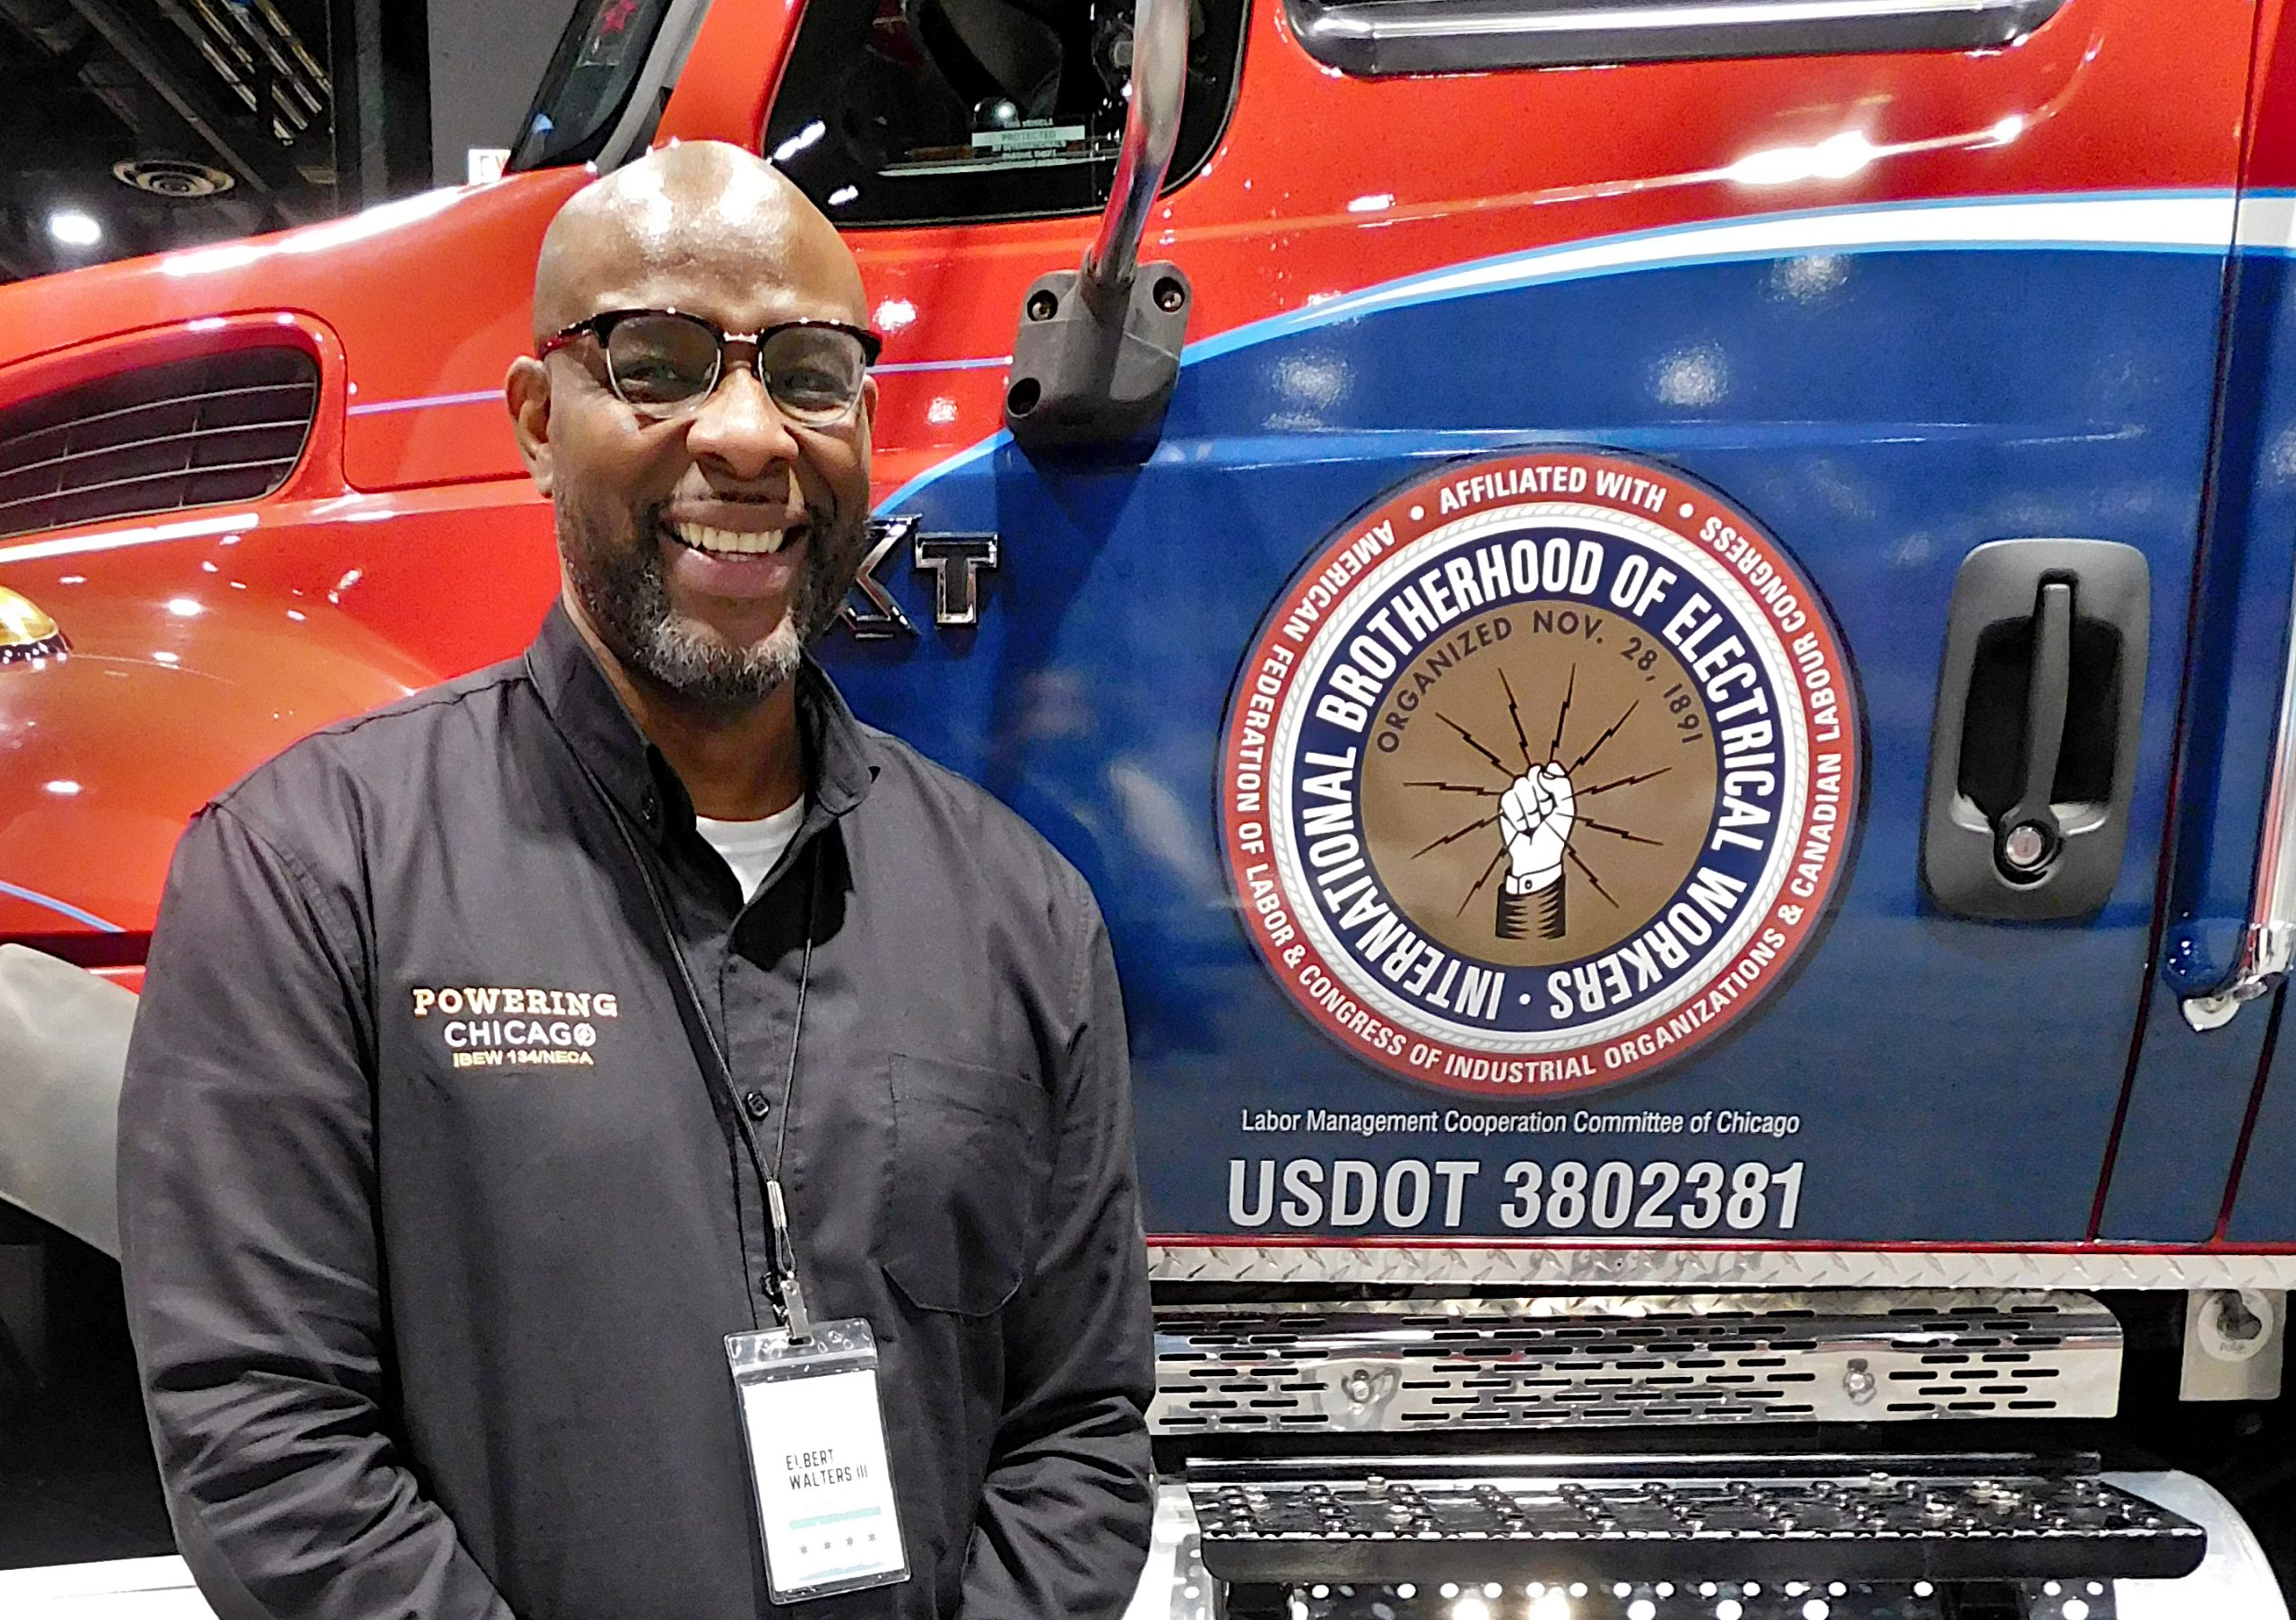 Elbert Walters III, executive director of Powering Chicago, poses with a mobile training lab at the 2023 Chicago Auto Show.